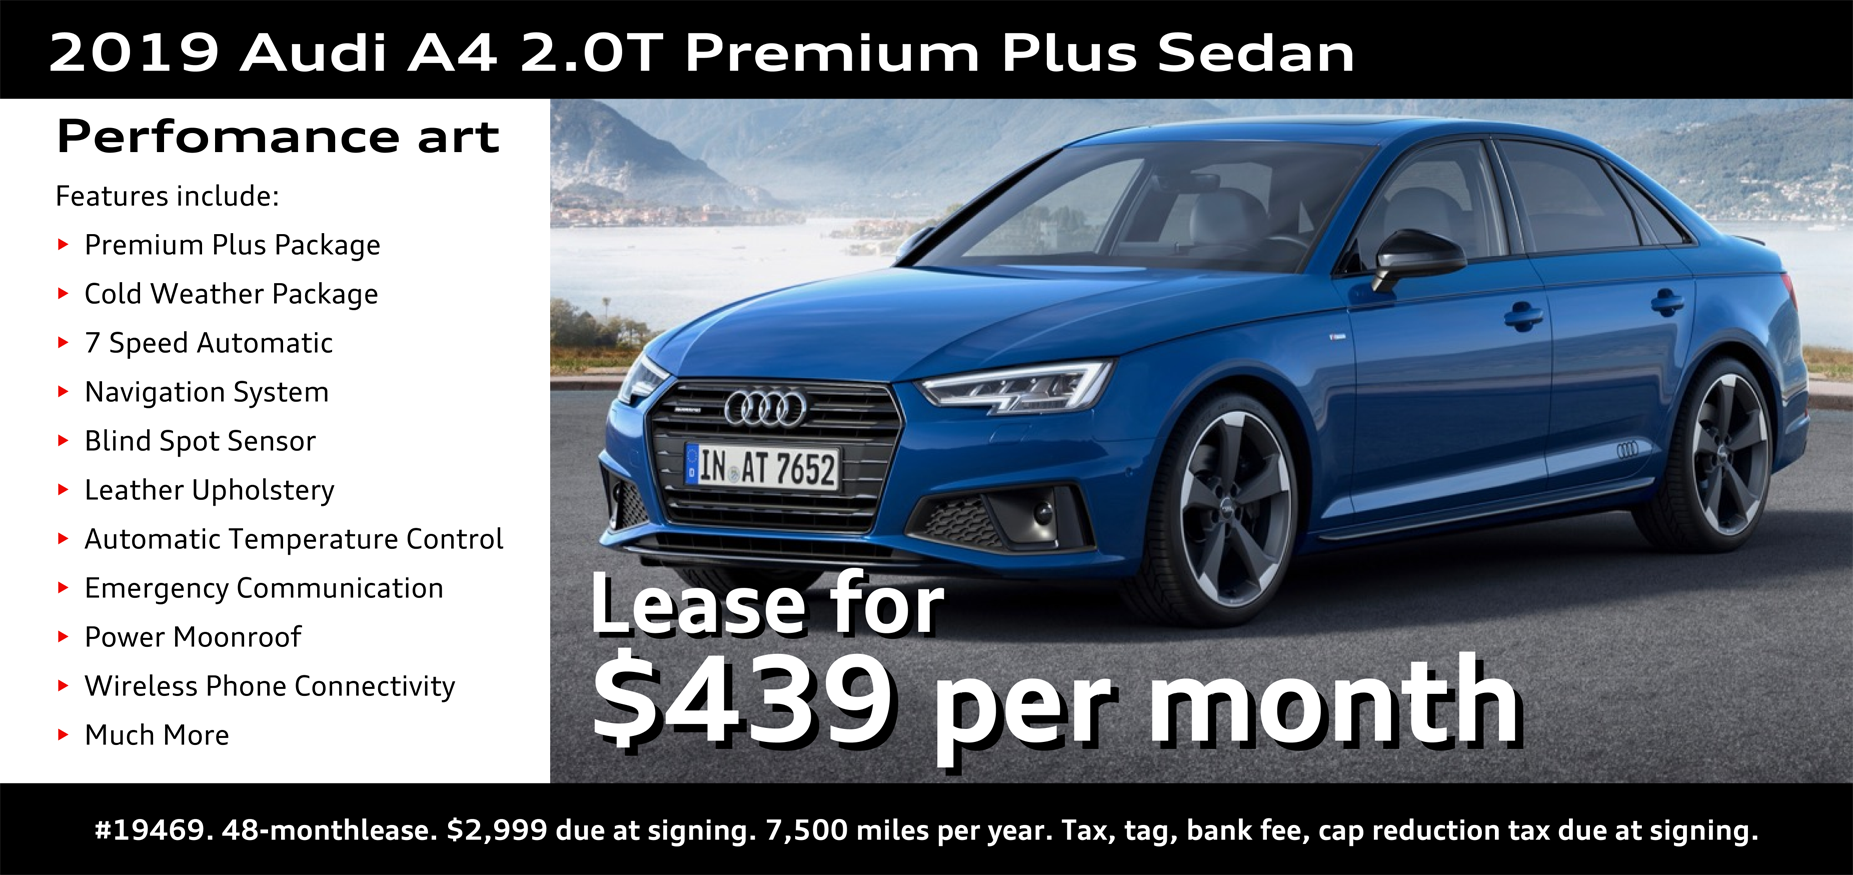 This month's new Audi lease offers Audi Lancaster